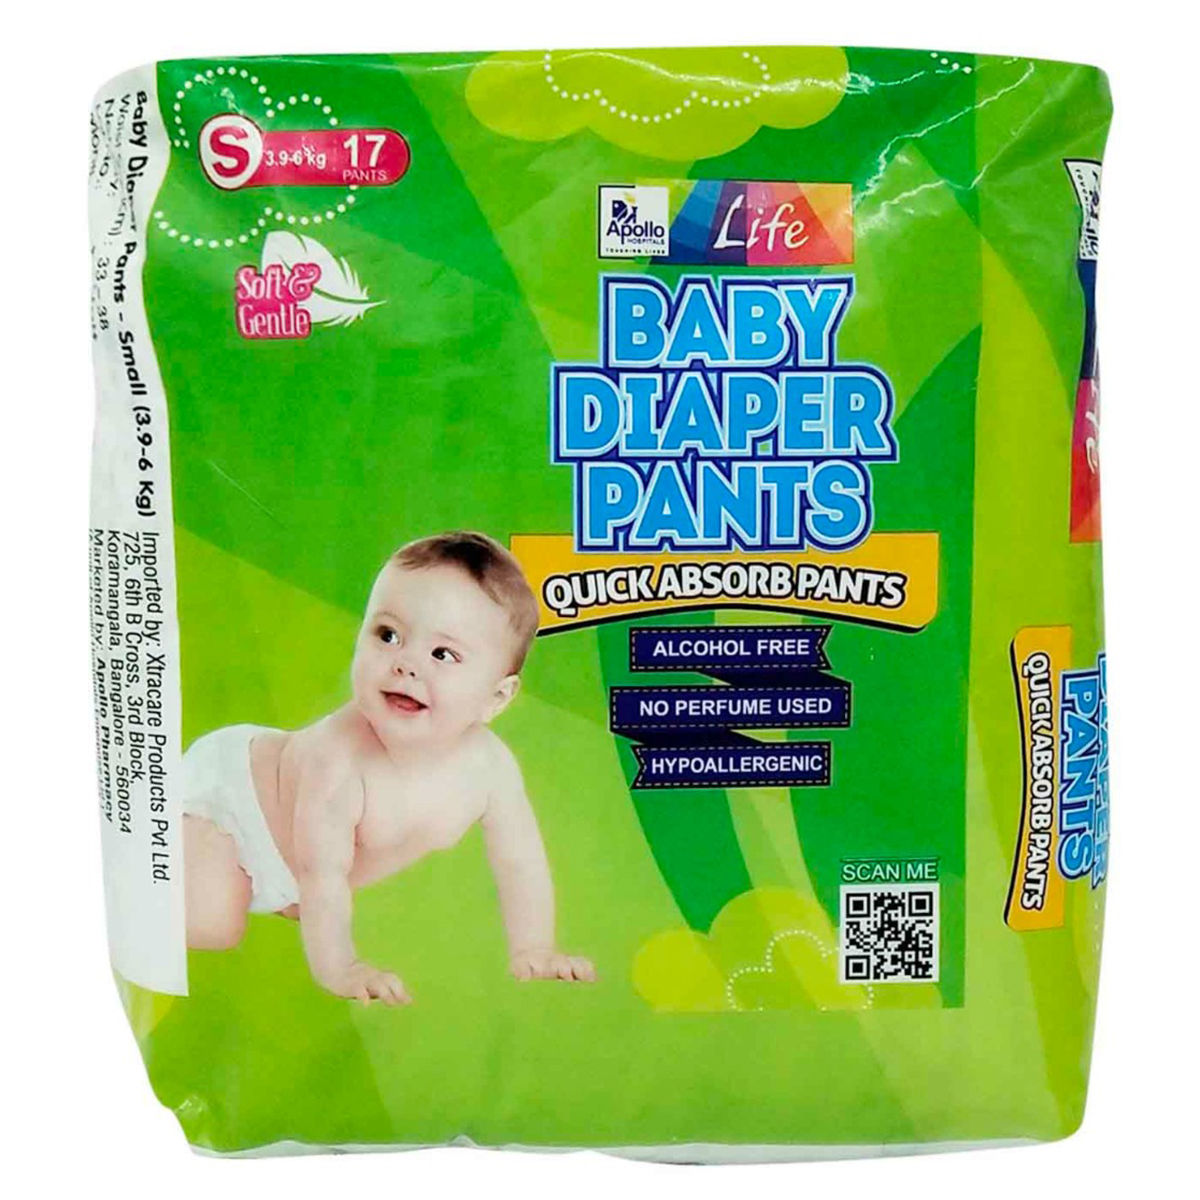 Diaper Pants NB Size for Babies - 3-5 kg | 2x Absorption | Mamaearth